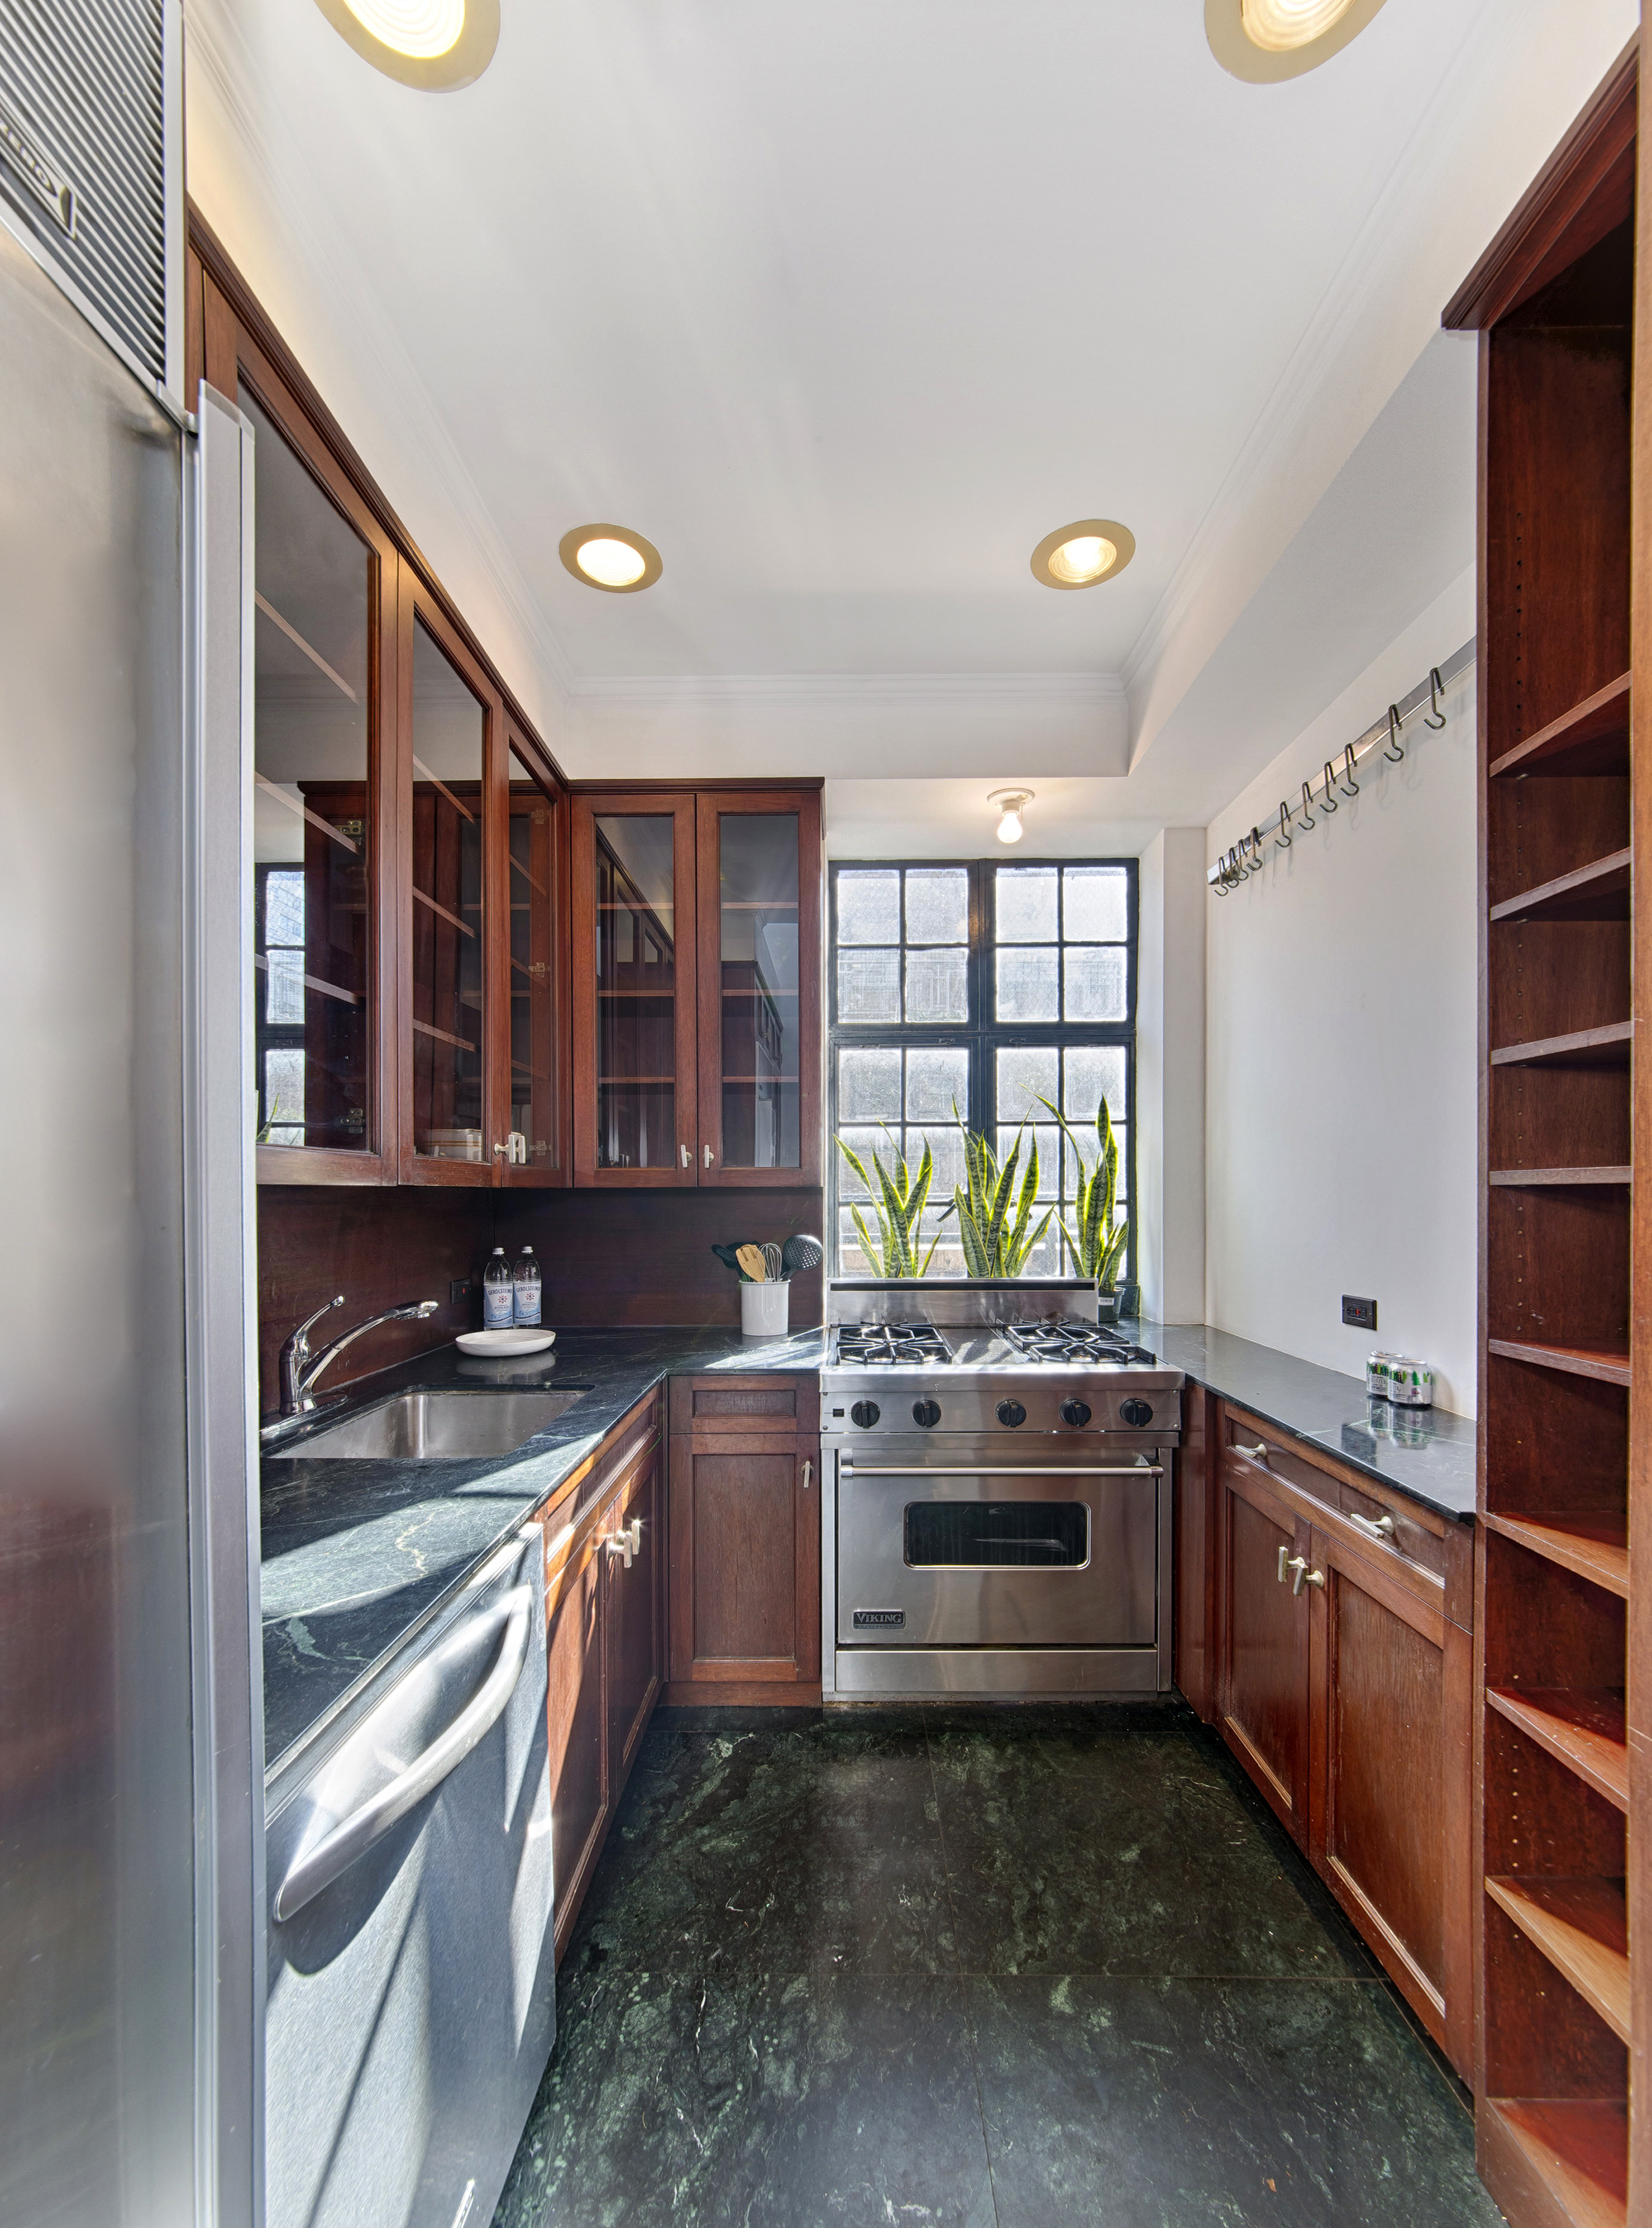 205 East 69th Street, co-ops, cool listings, David Wolkowsky, penthouses